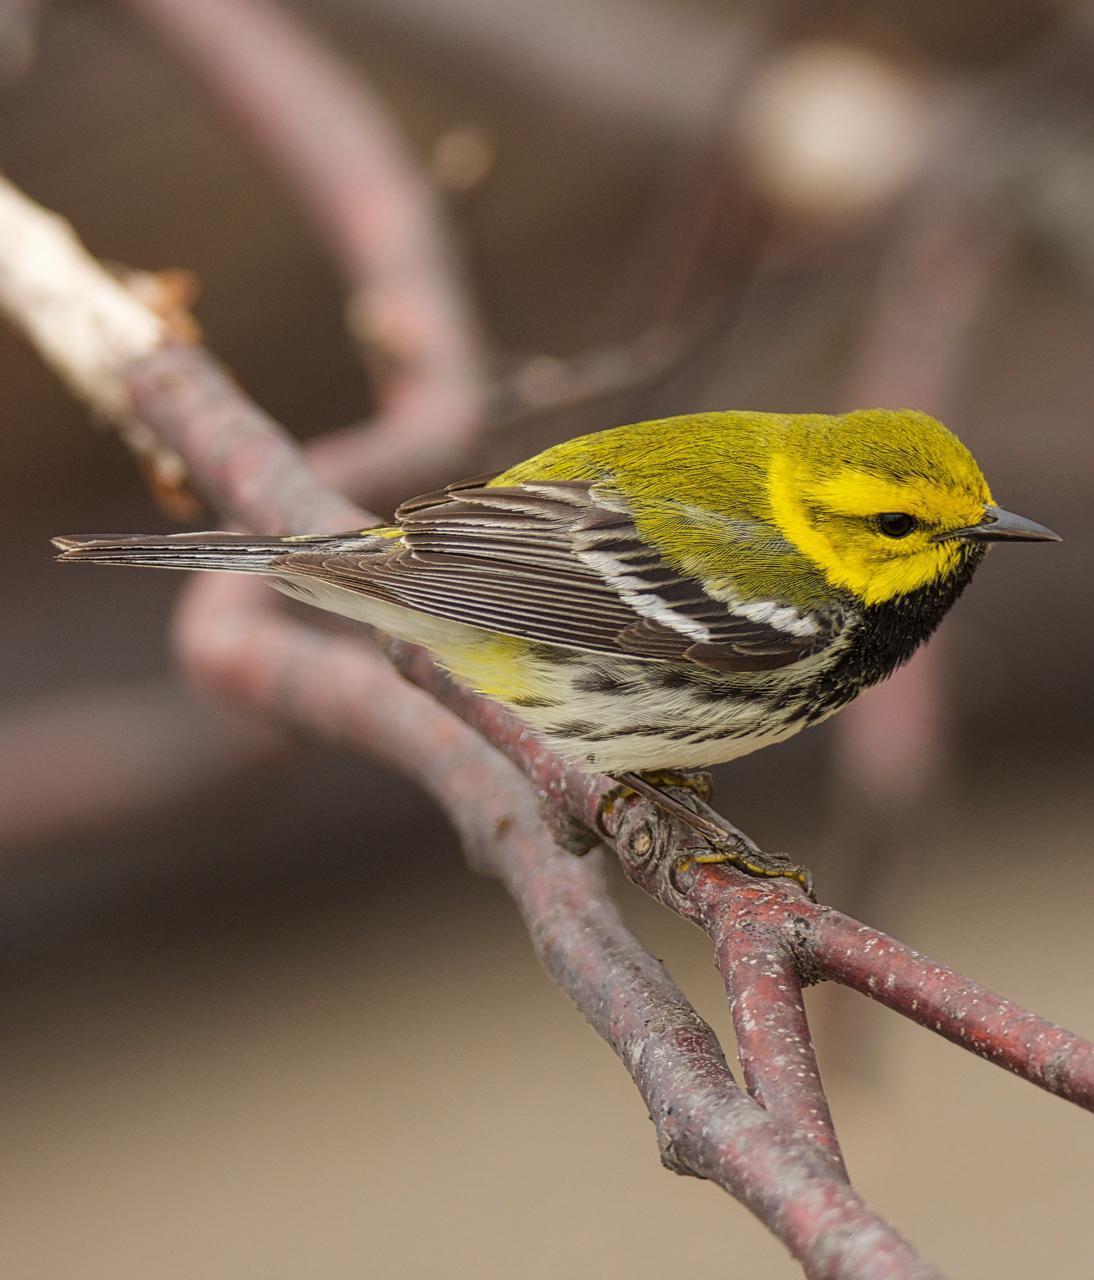 Black-throated Green Warbler Photo by Brian Avent